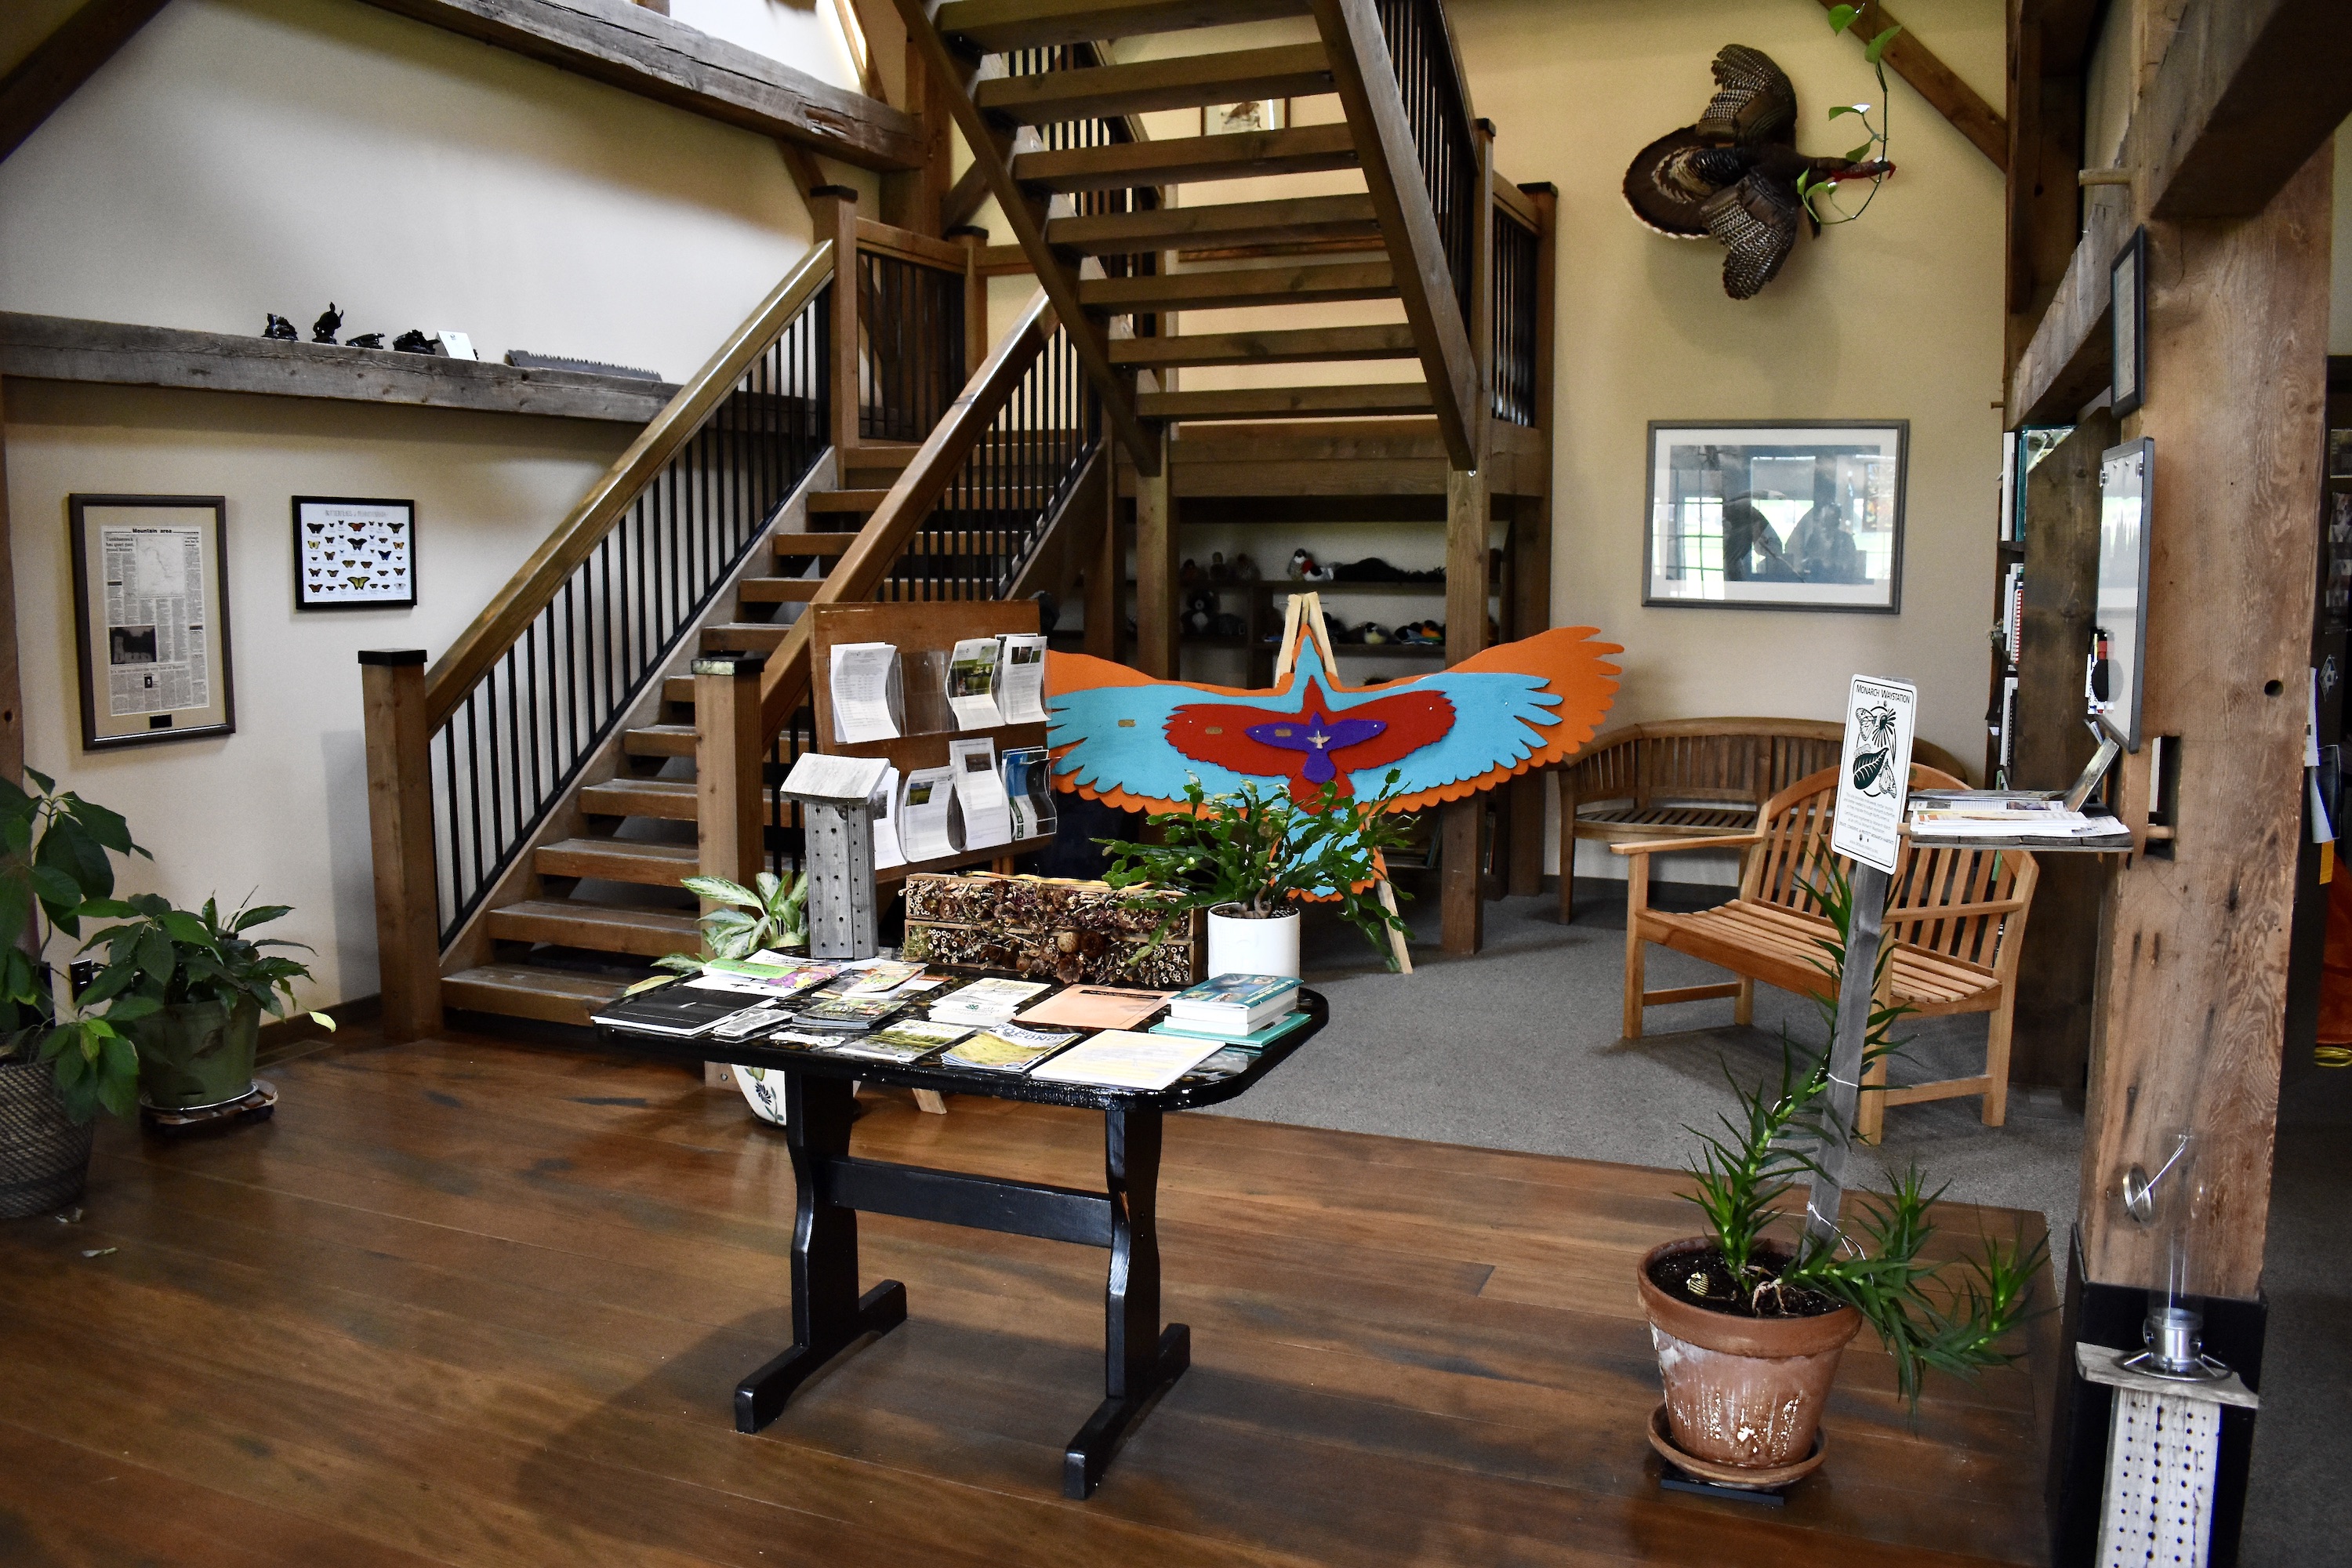  A view of the inside of a nature center with a table featuring pamphlets and brochures. There are animal posters on the walls and wooden stairs to the left.